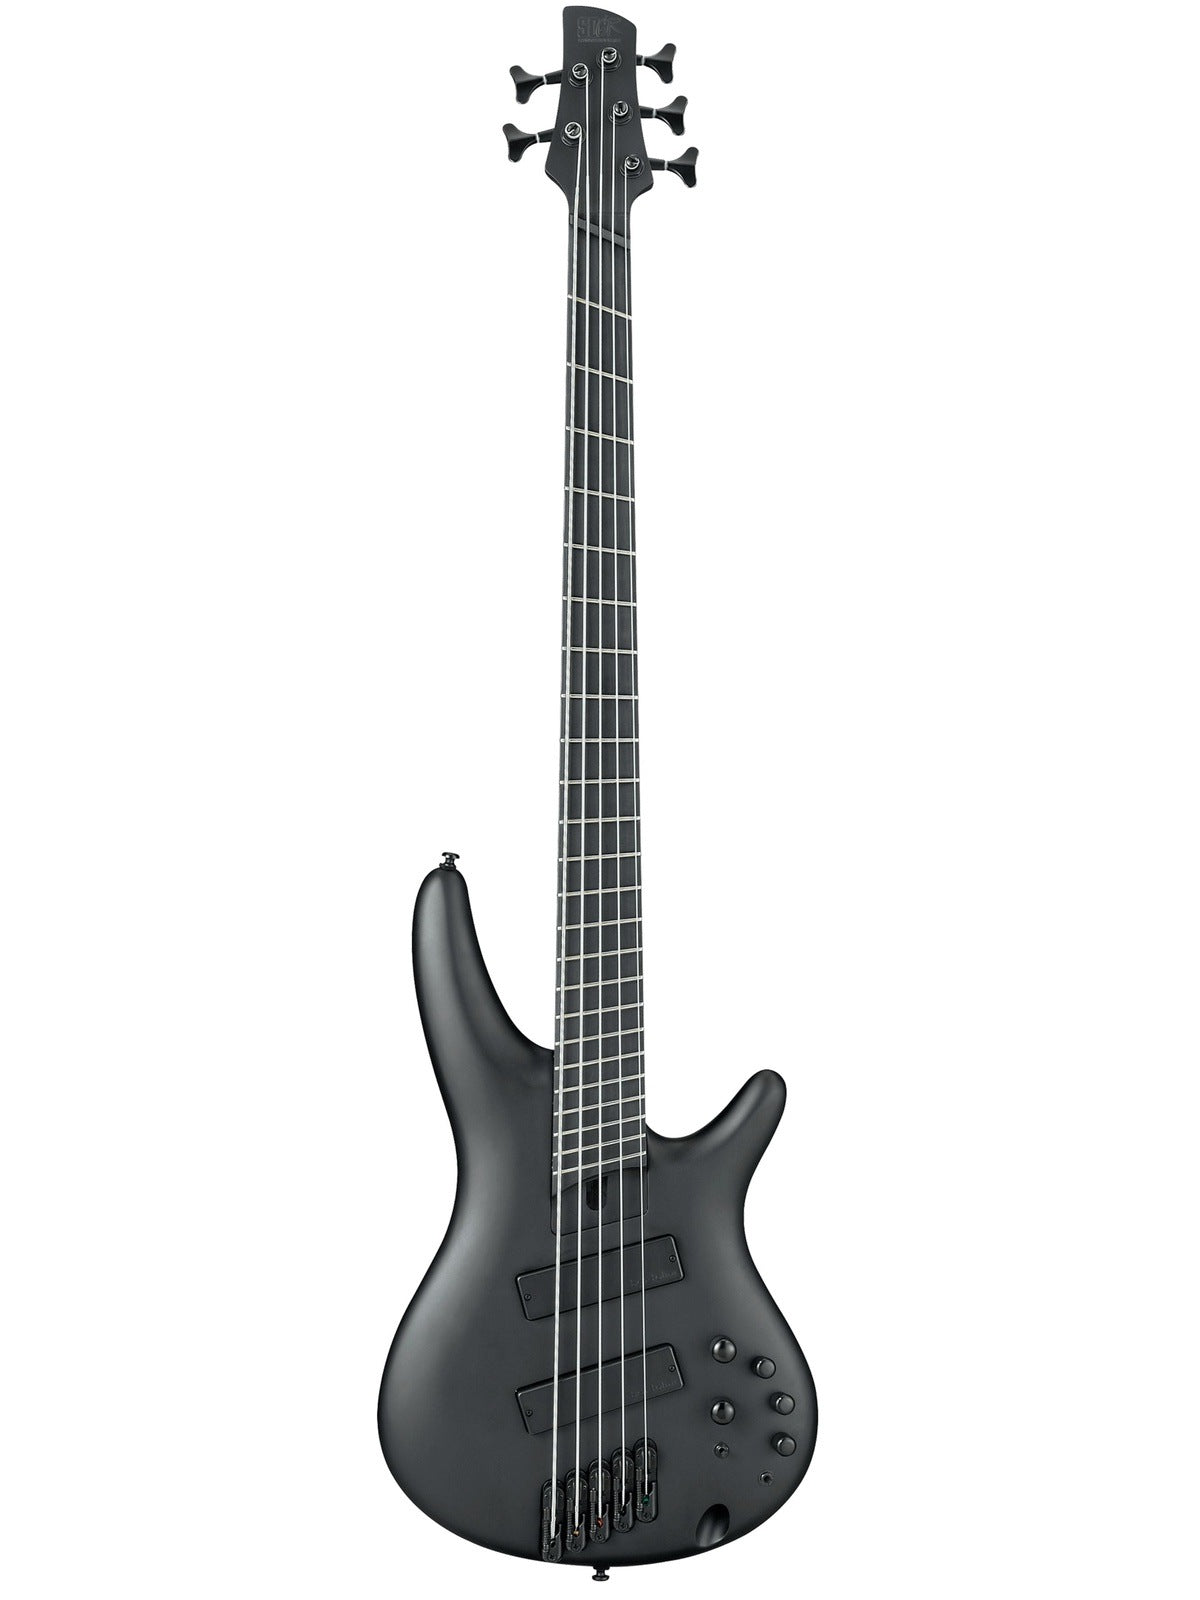 Ibanez SRMS625EX Limited Edition IronLabel Multi-Scale 5-String Electric Bass, Black Flat